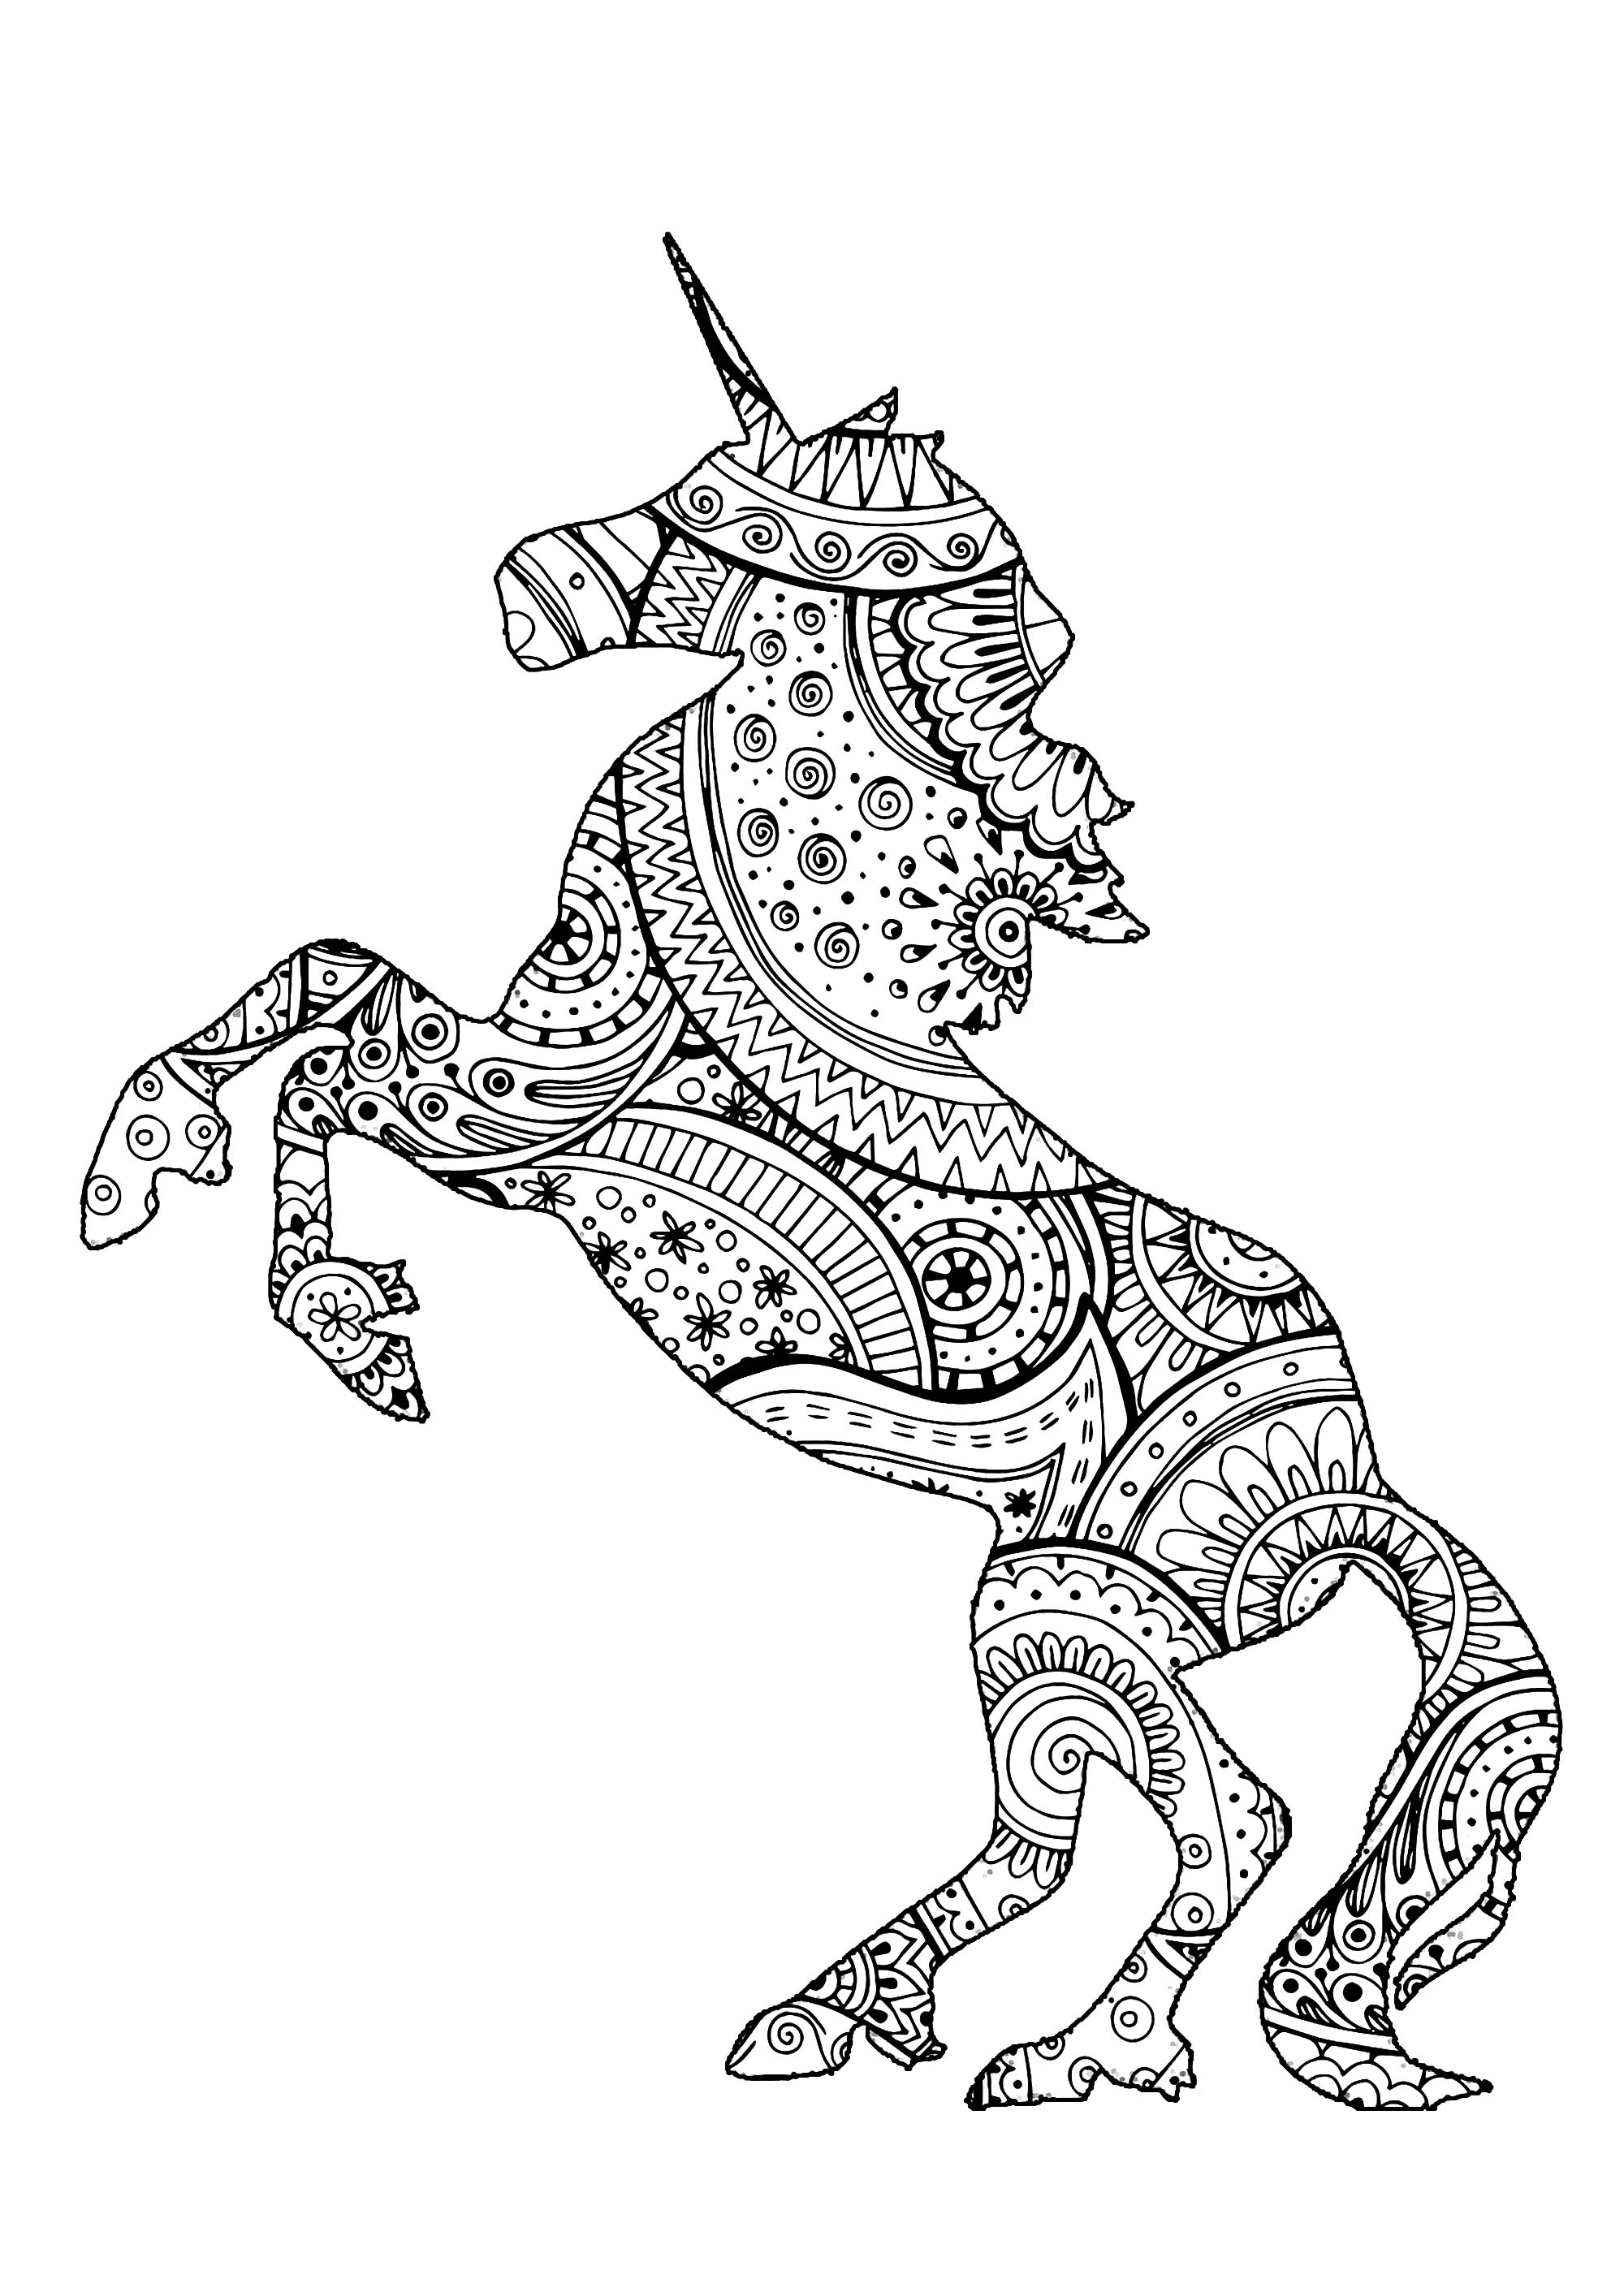 Unicorn shape with patterns - Unicorns Adult Coloring Pages